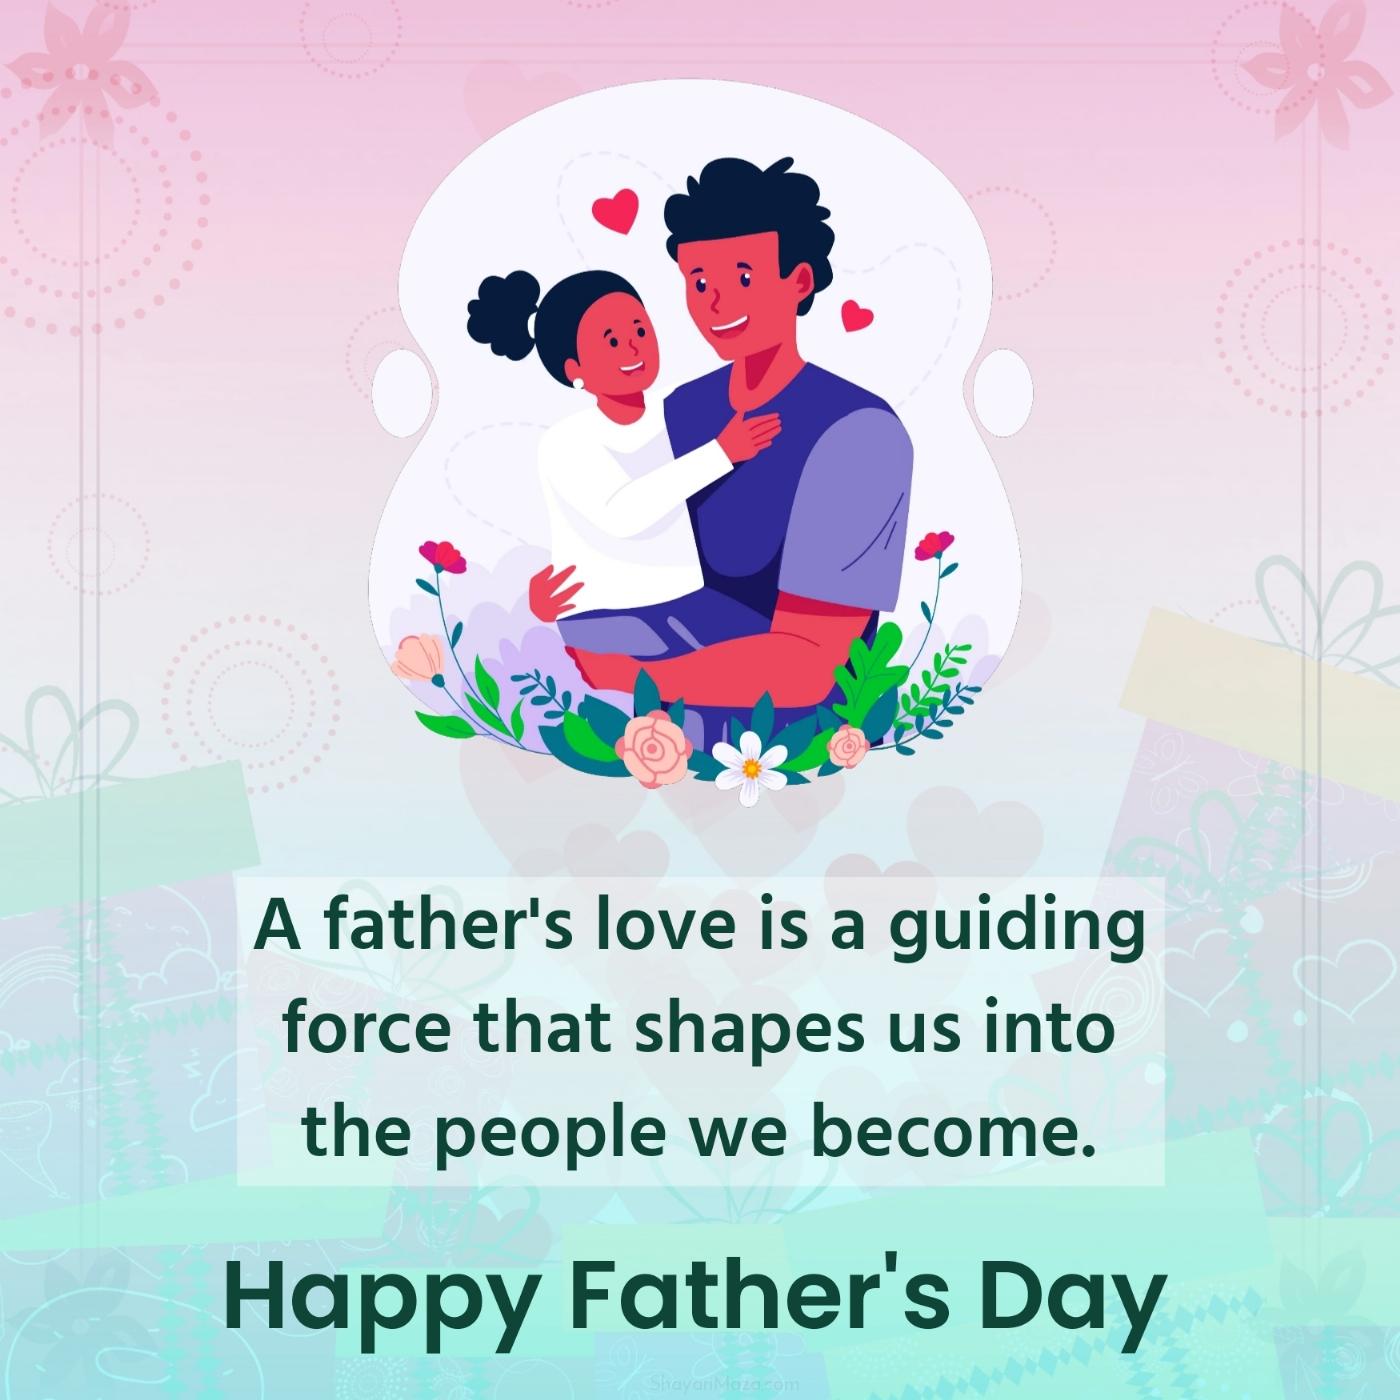 A father's love is a guiding force that shapes us